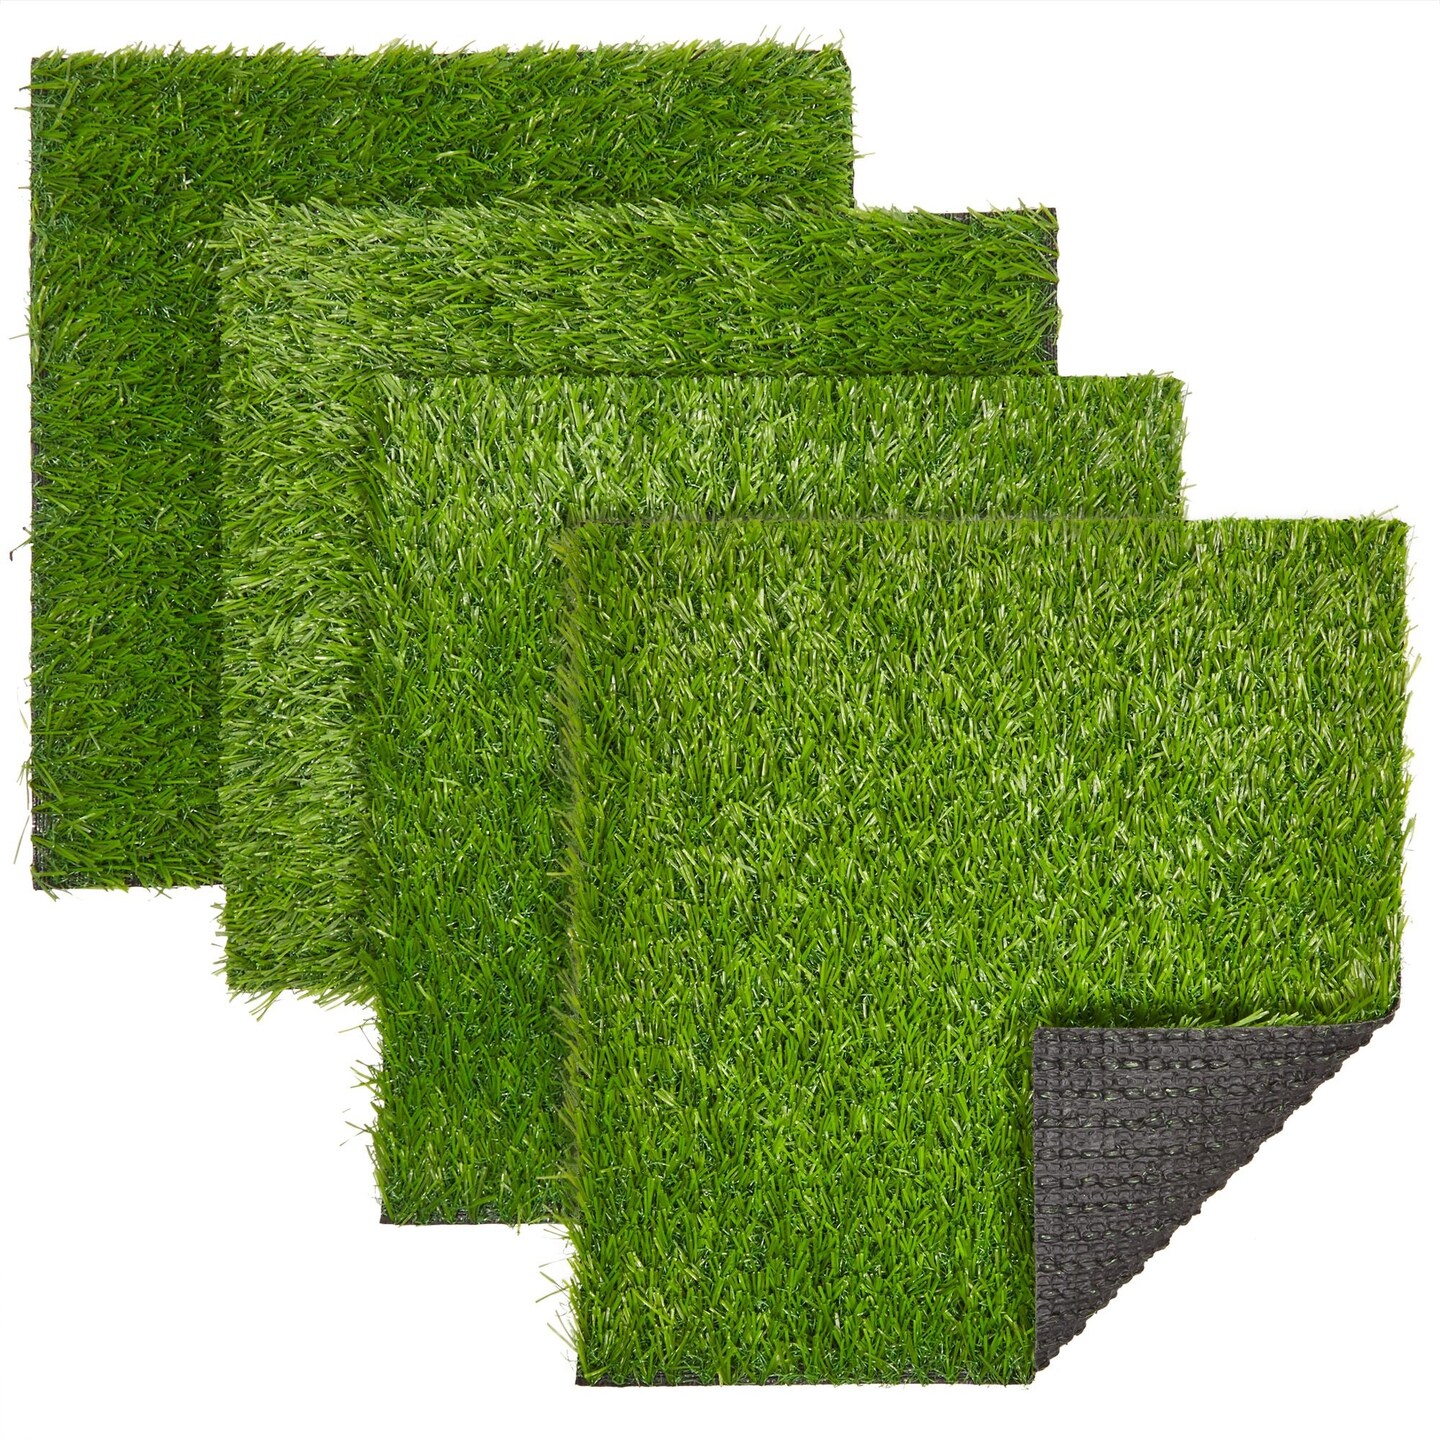 Juvale 4-Pack Non-Slip Artificial Grass Tiles for Indoor &#x26; Outdoor Use | 12x12 - 0.25 in Thick Mats | Easy to Clean &#x26; Durable, Soft Like Natural Lawn | Safe for Kids &#x26; Pets | Patio, Floor &#x26; Wall Decor